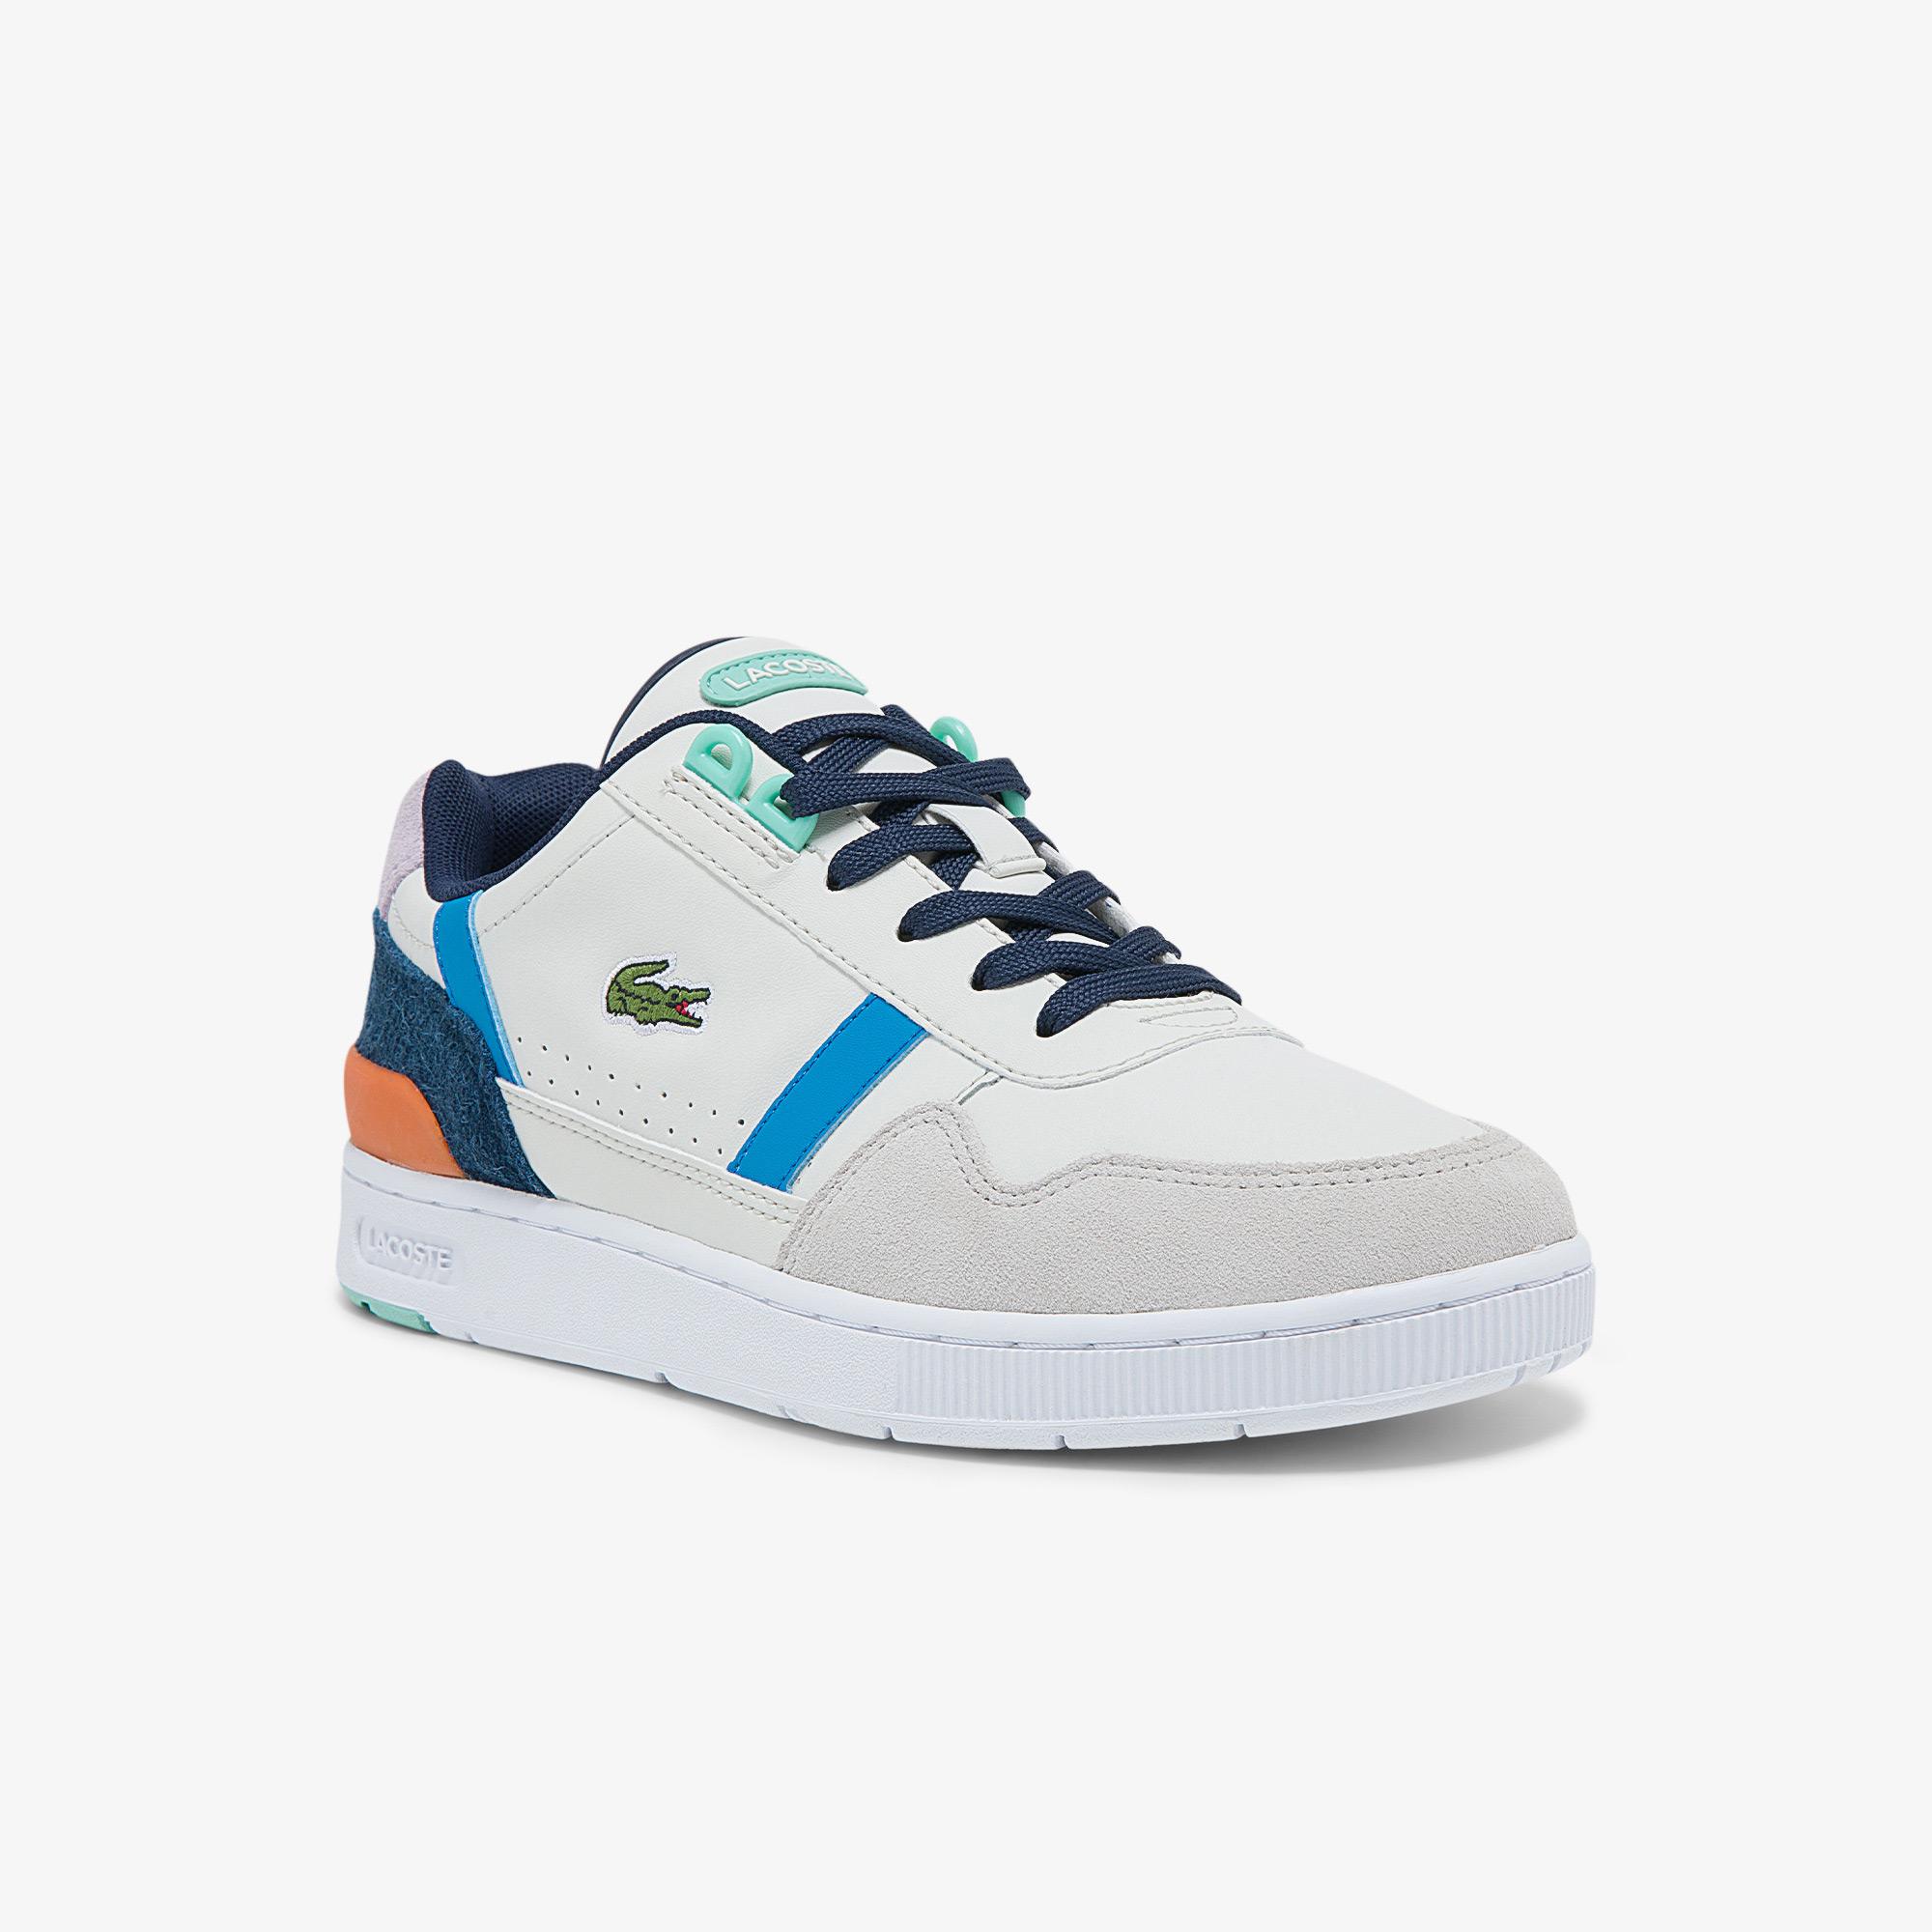 Lacoste Women's T-Clip Leather and Suede Sneakers